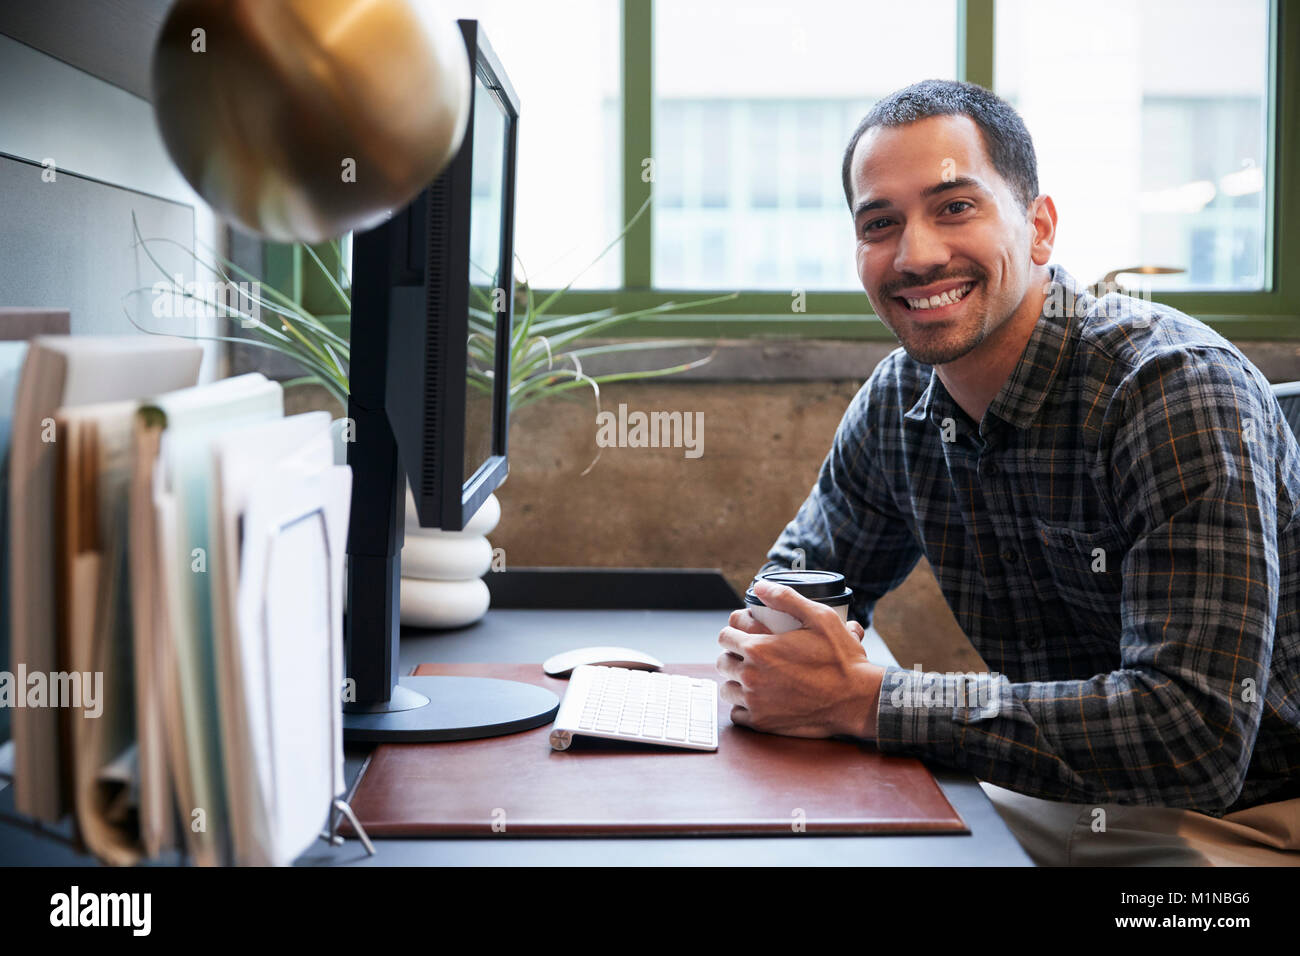 Hispanic man at a computer in an office smiling to camera Stock Photo